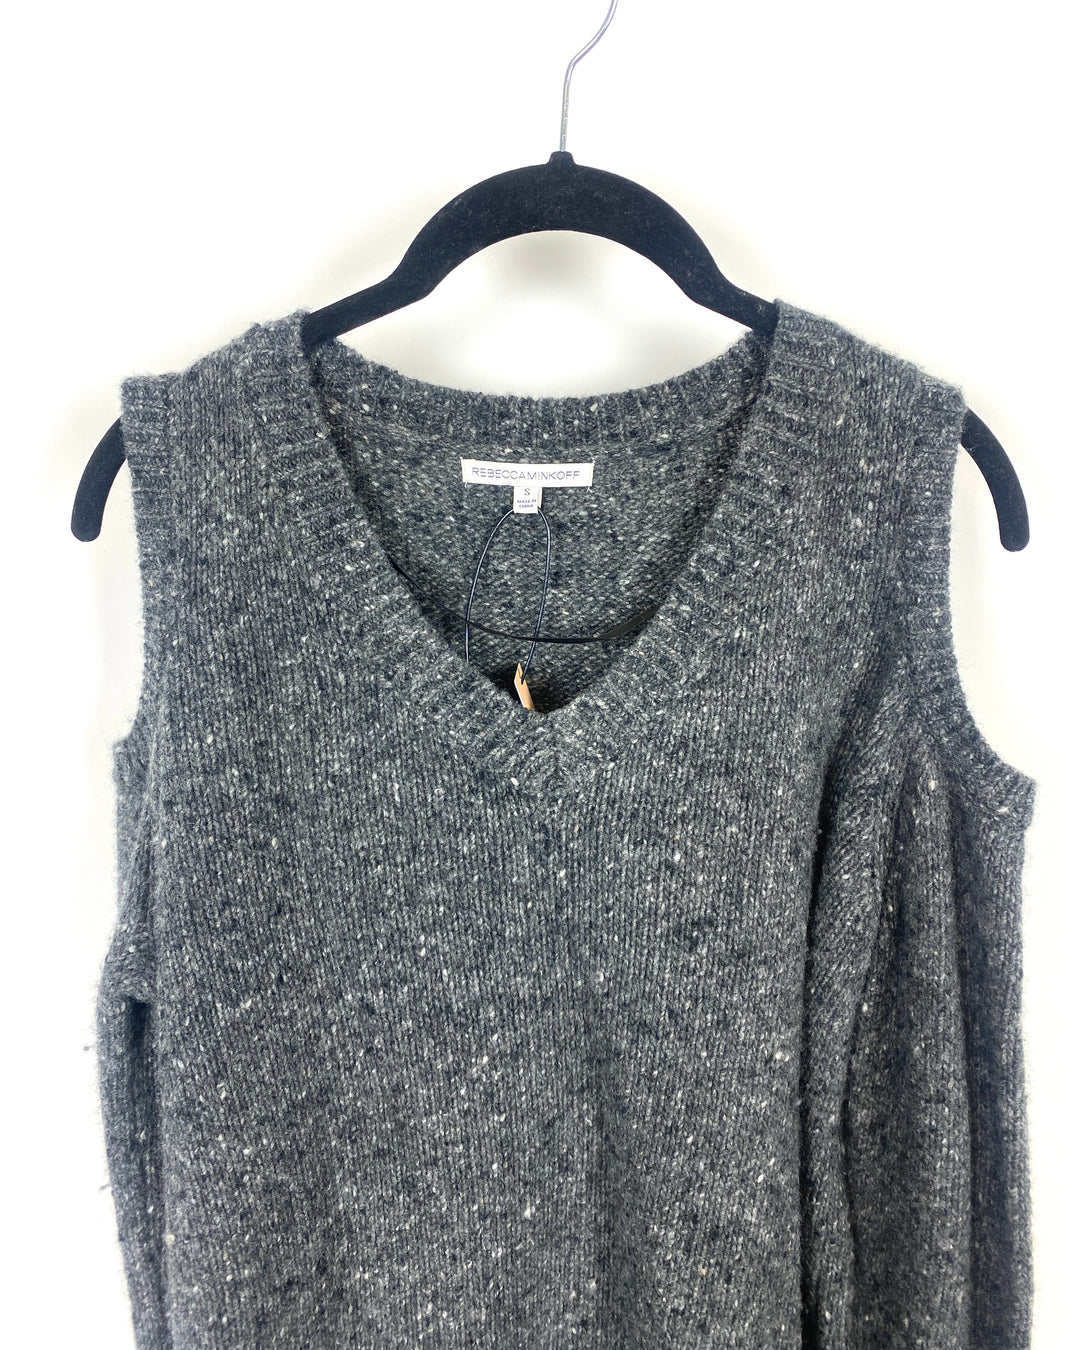 Gray Cold Shoulder Sweater - Small (Size 4)